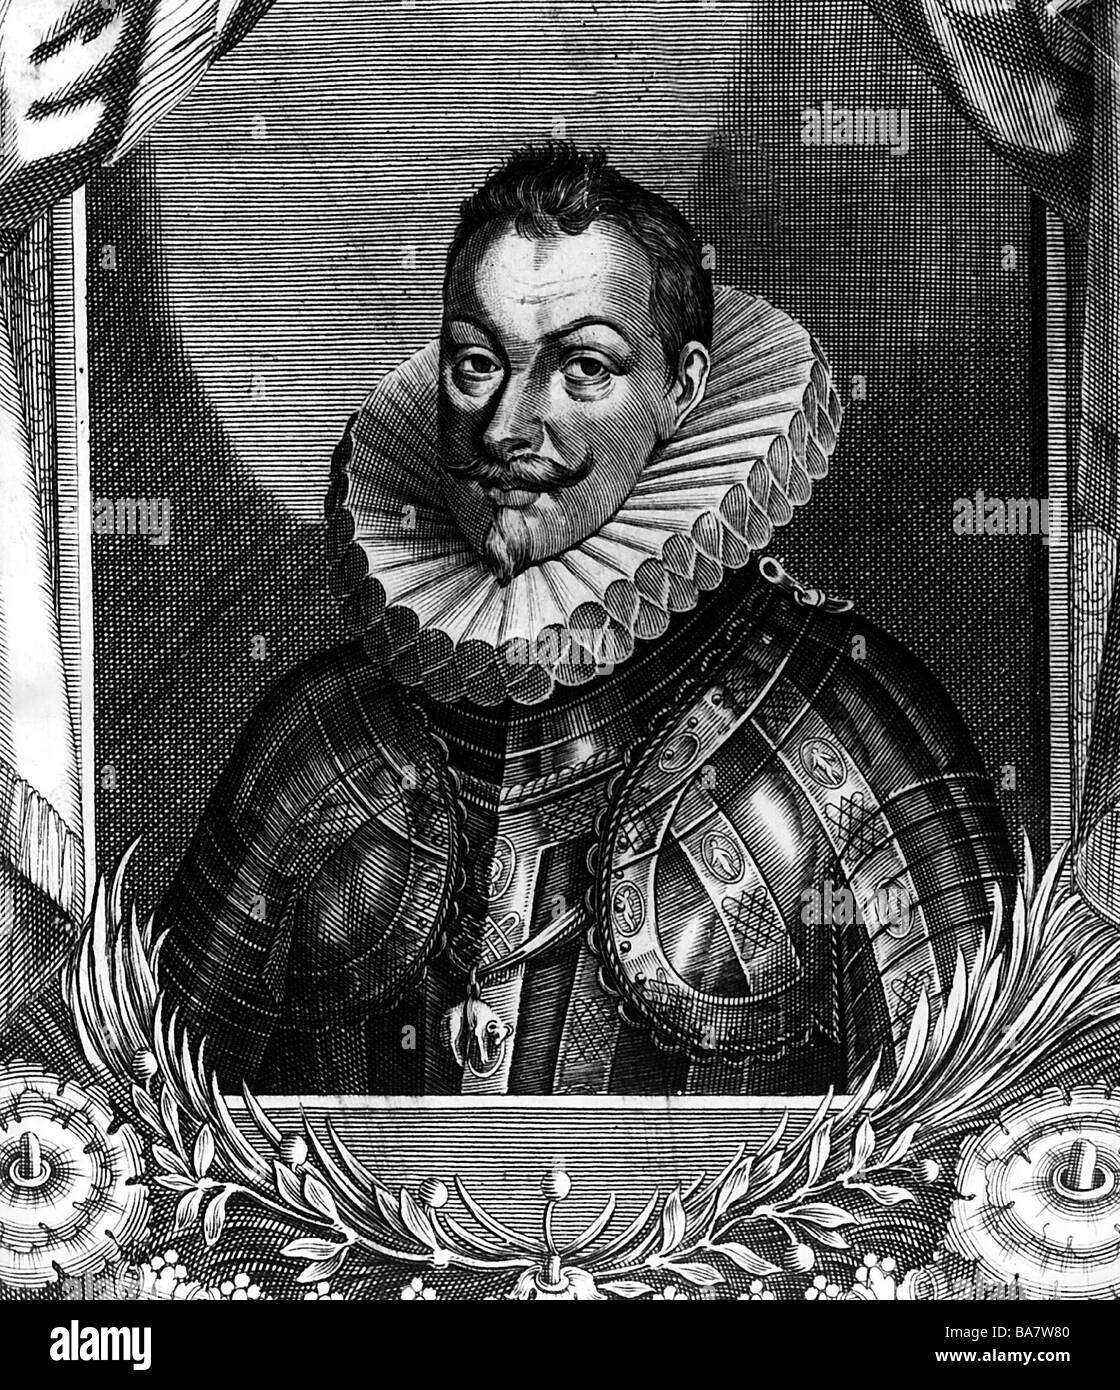 Philip III, 14.4.1578 - 31.3.1621, King of Spain 14.4.1598  - 31.3.1621, portrait, copper engraving, 17th century, , Artist's Copyright has not to be cleared Stock Photo